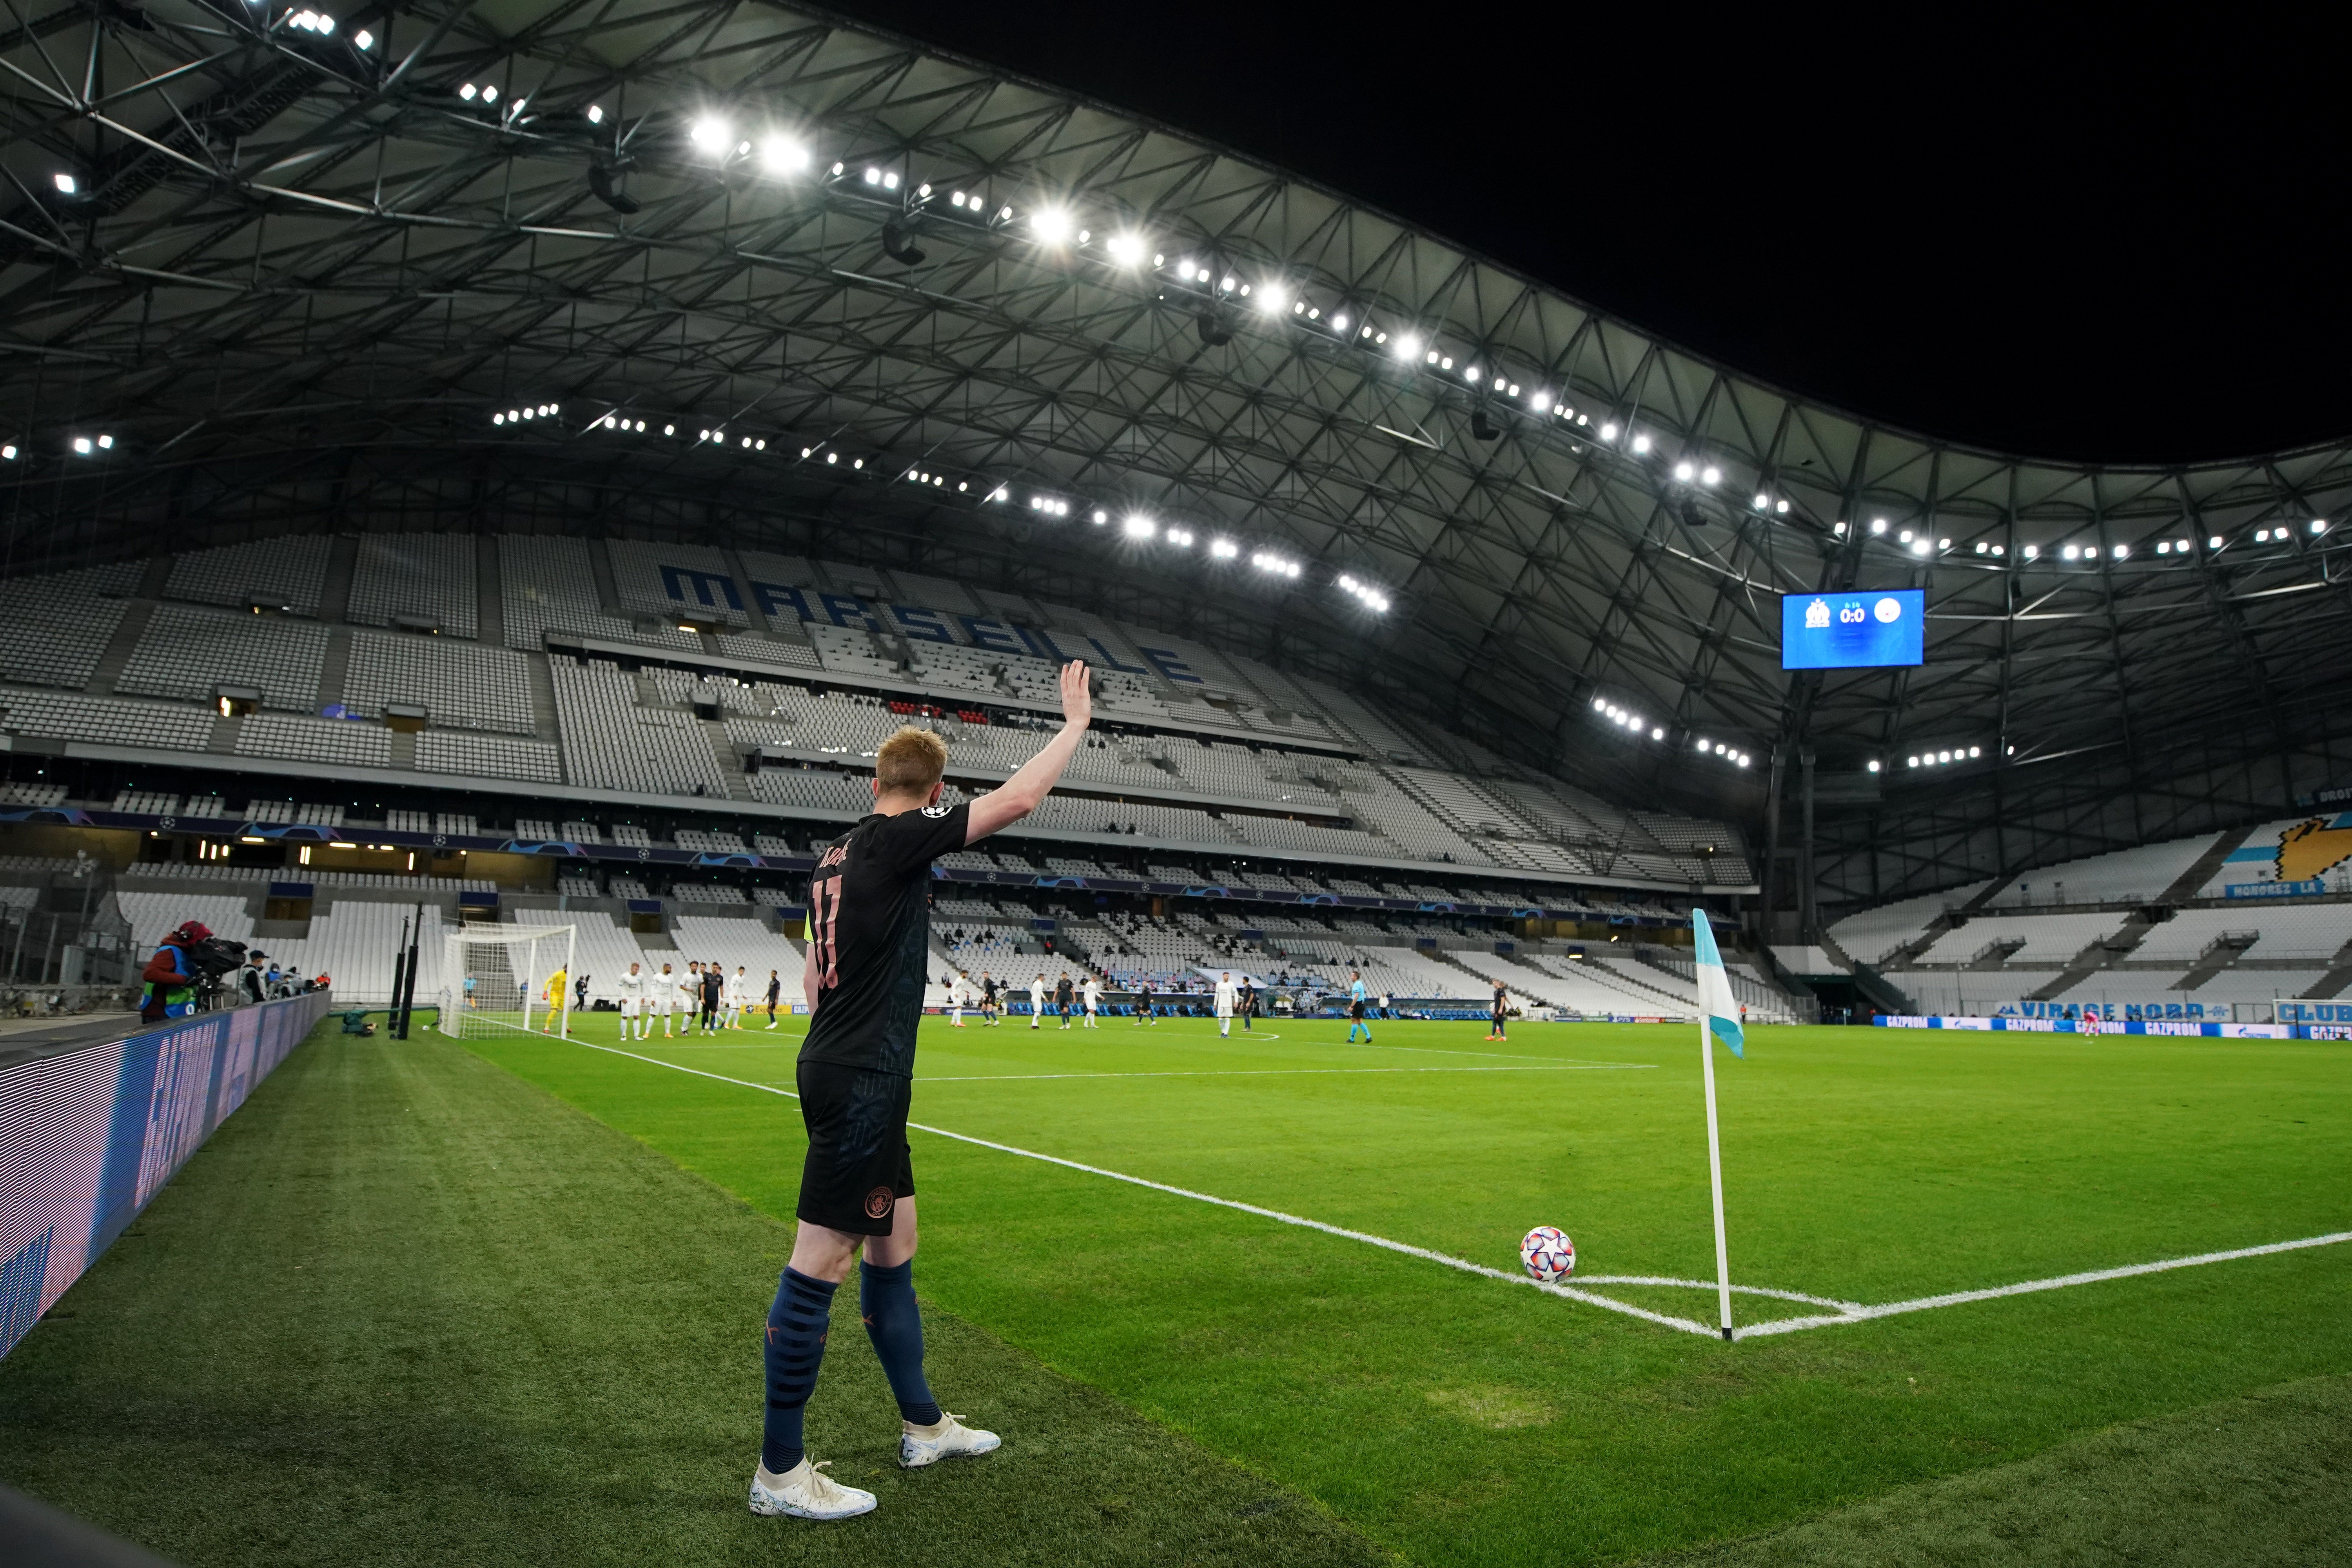 Kevin De Bruyne shined in City’s win at Marseille